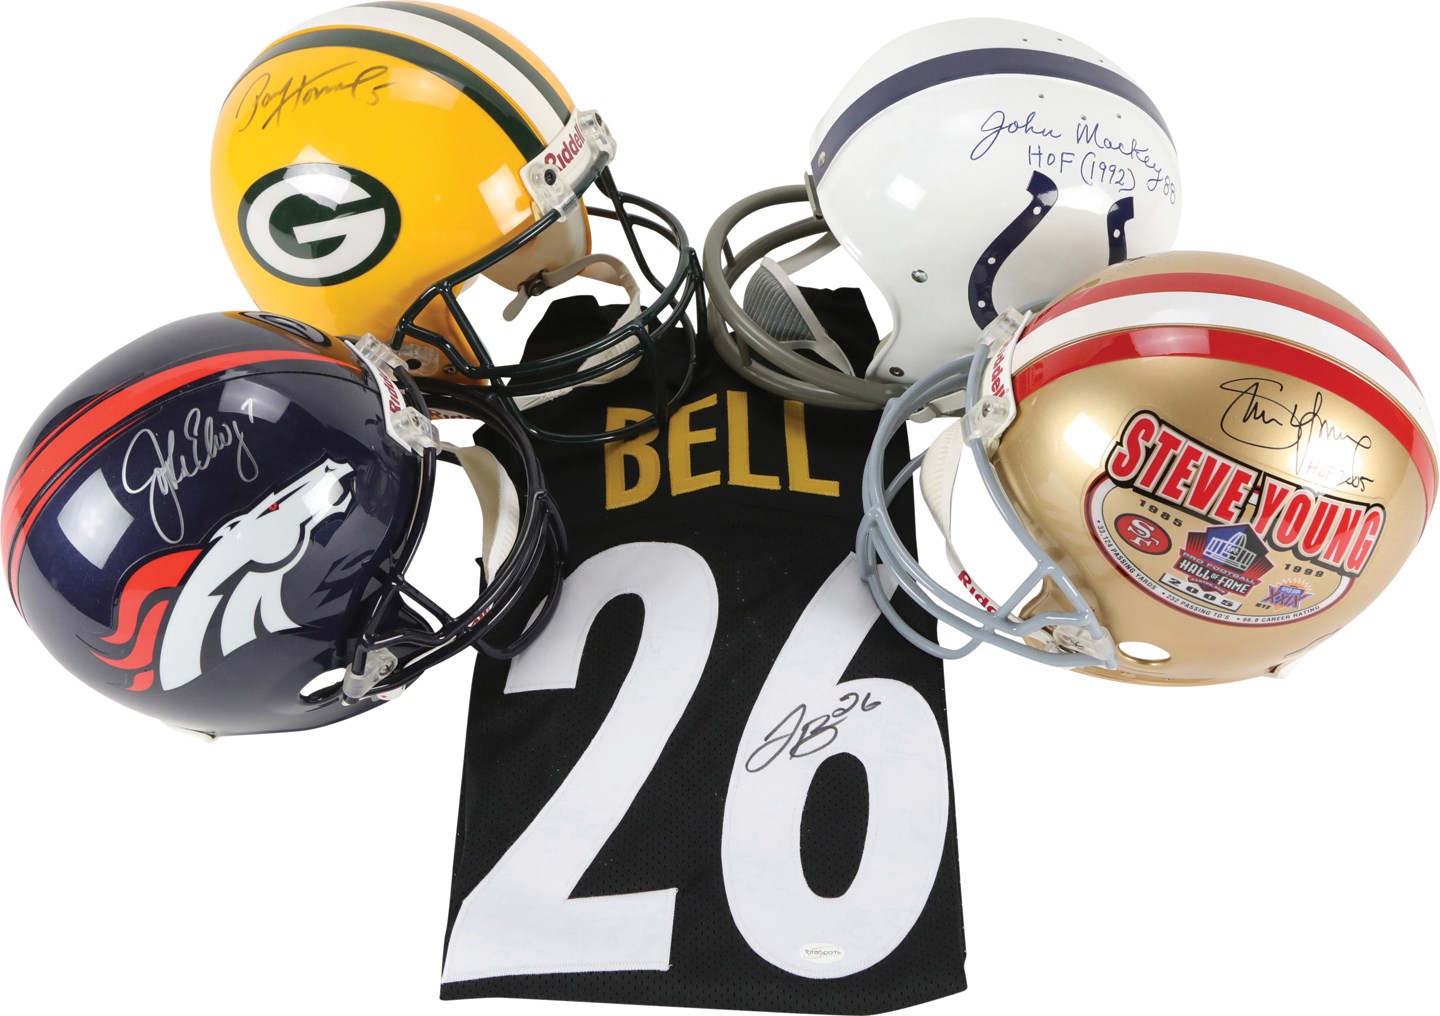 Football - NFL Signed Full Size Helmet & Jersey Collection (5)